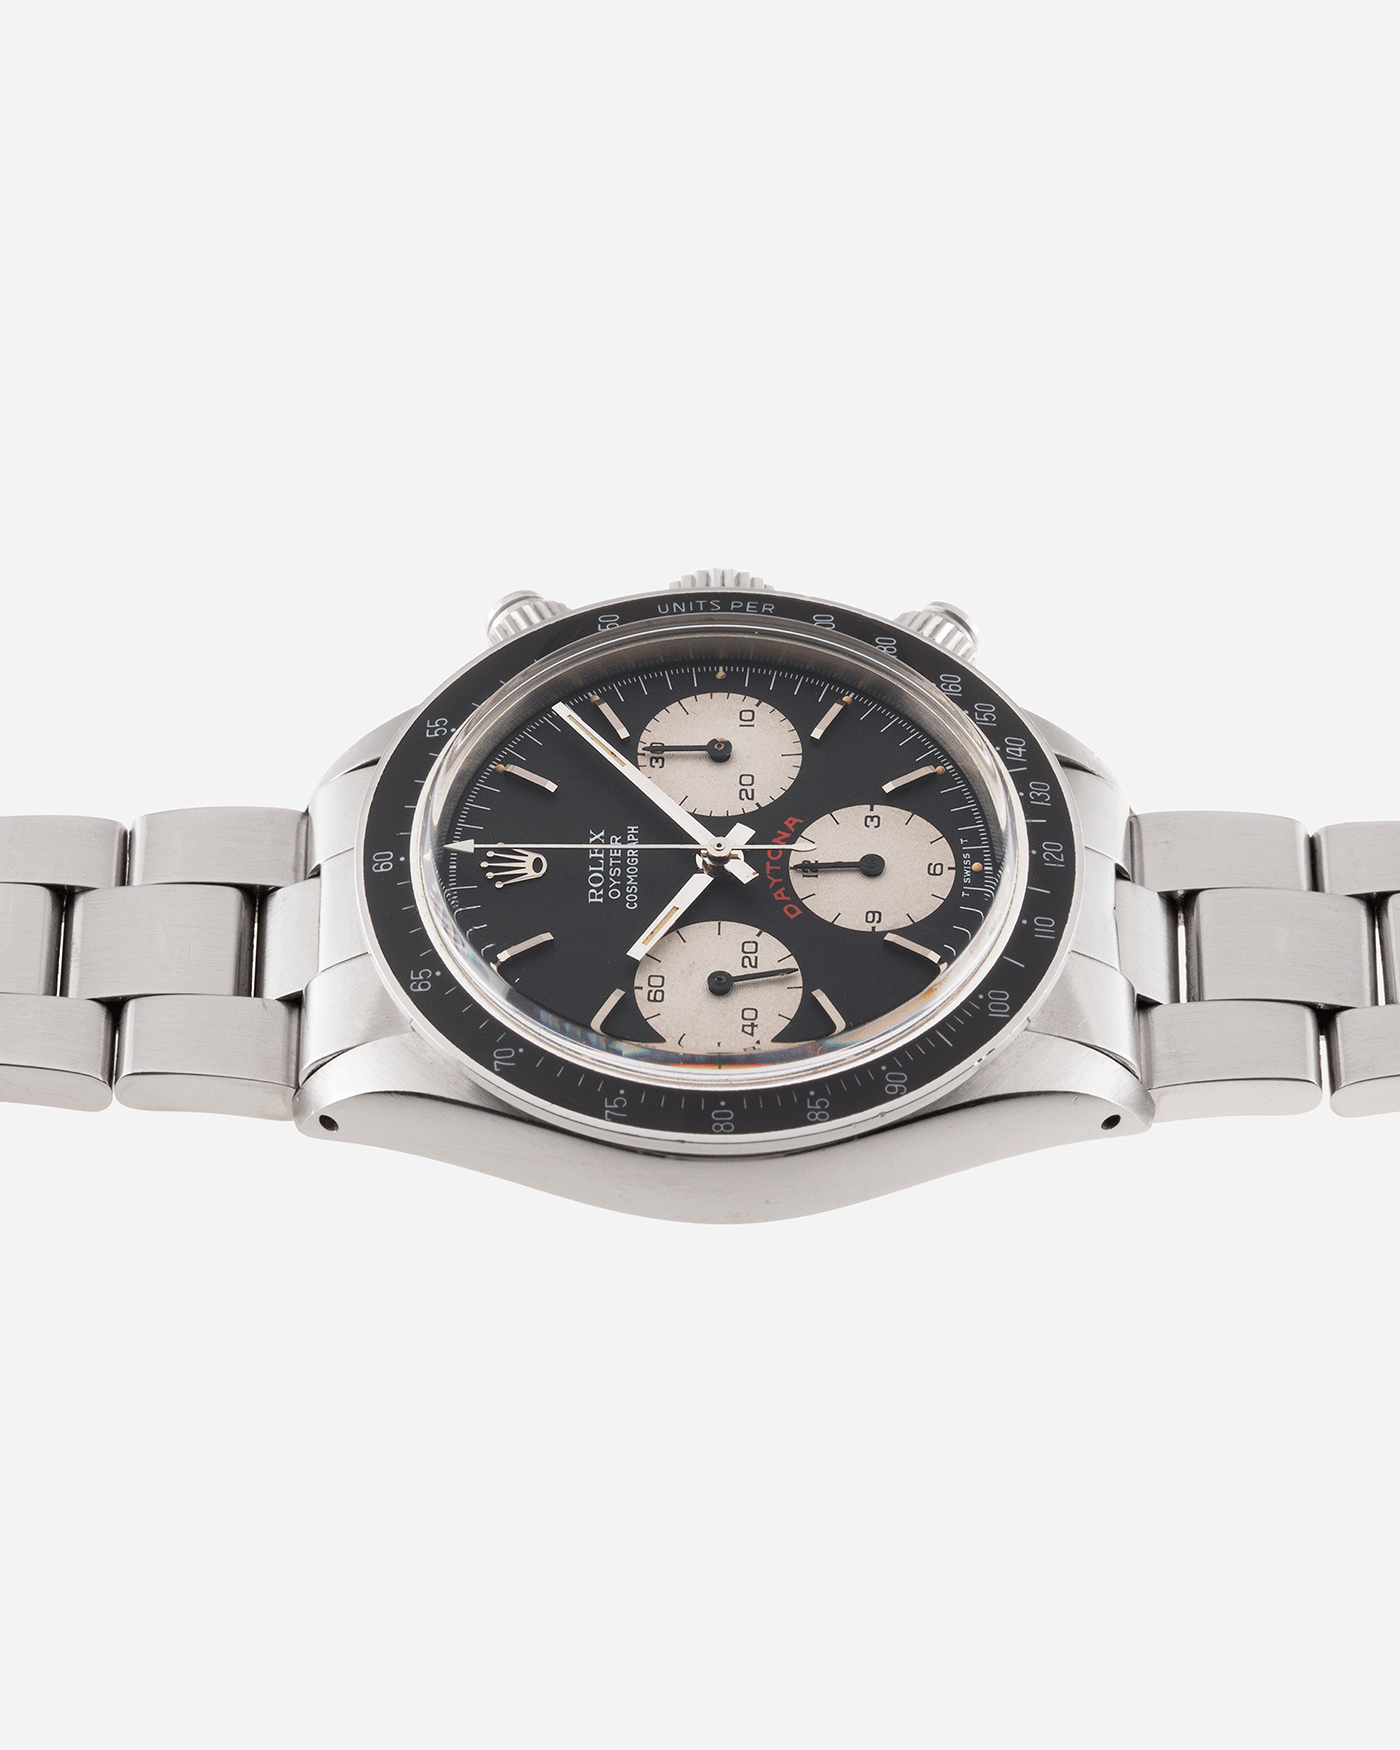 Brand: Rolex Year: 1985 Model: Cosmograph Daytona Reference Number: 6263 Serial Number: 8,7XXX,XXX Material: Stainless Steel Movement: Valjoux 727 Case Diameter: 36mm Strap: Rolex 78350 Oyster Bracelet with 571 Endlinks